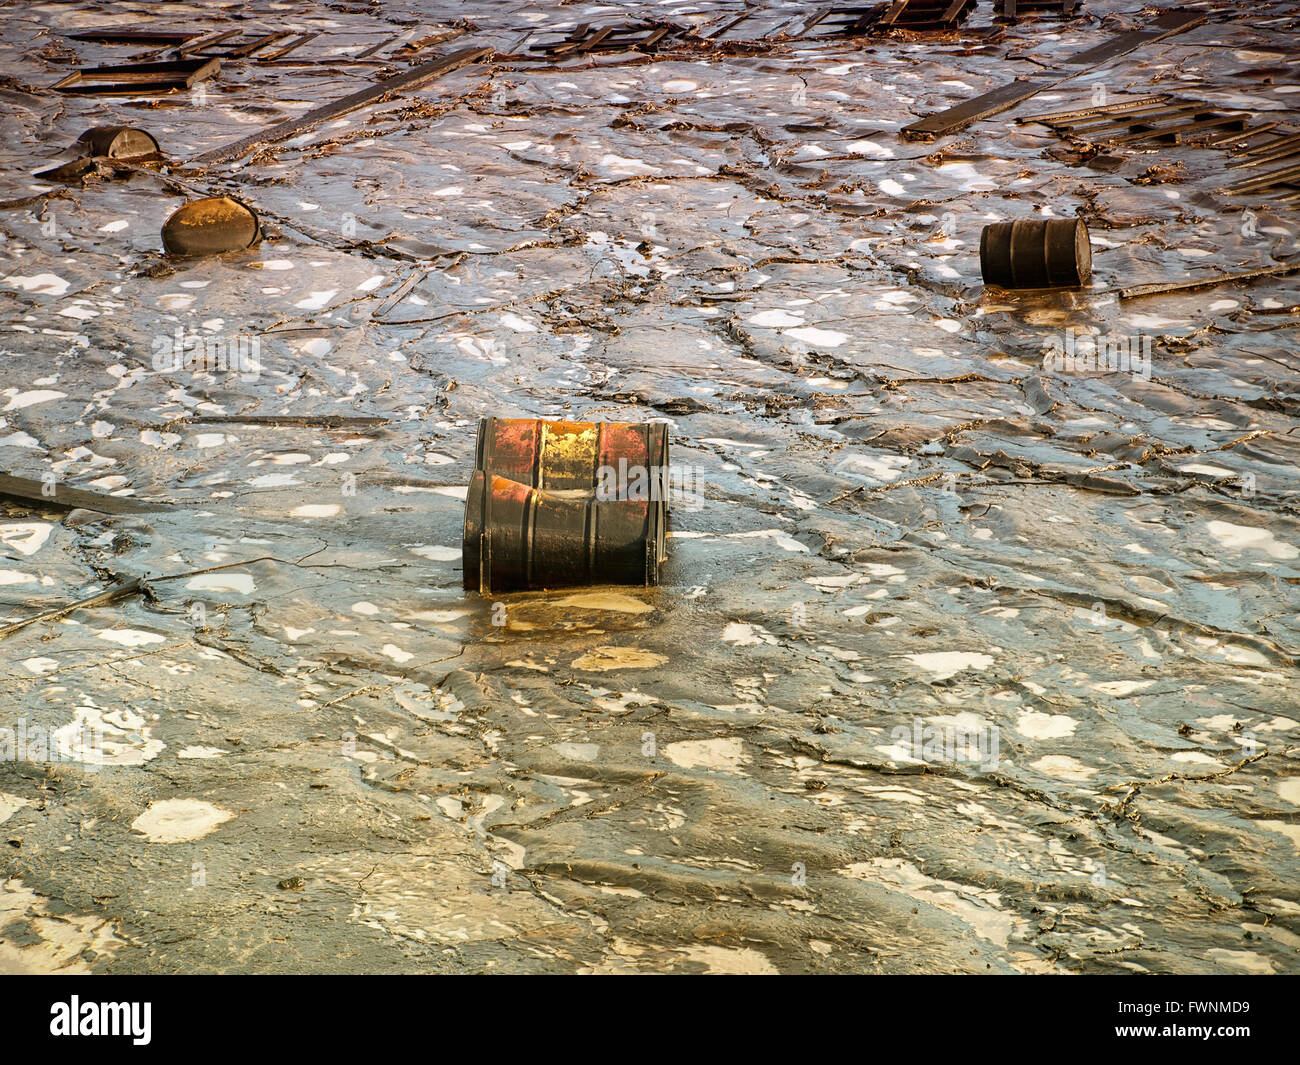 Old industrial metal barrels surrounded by contaminated environment. Stock Photo